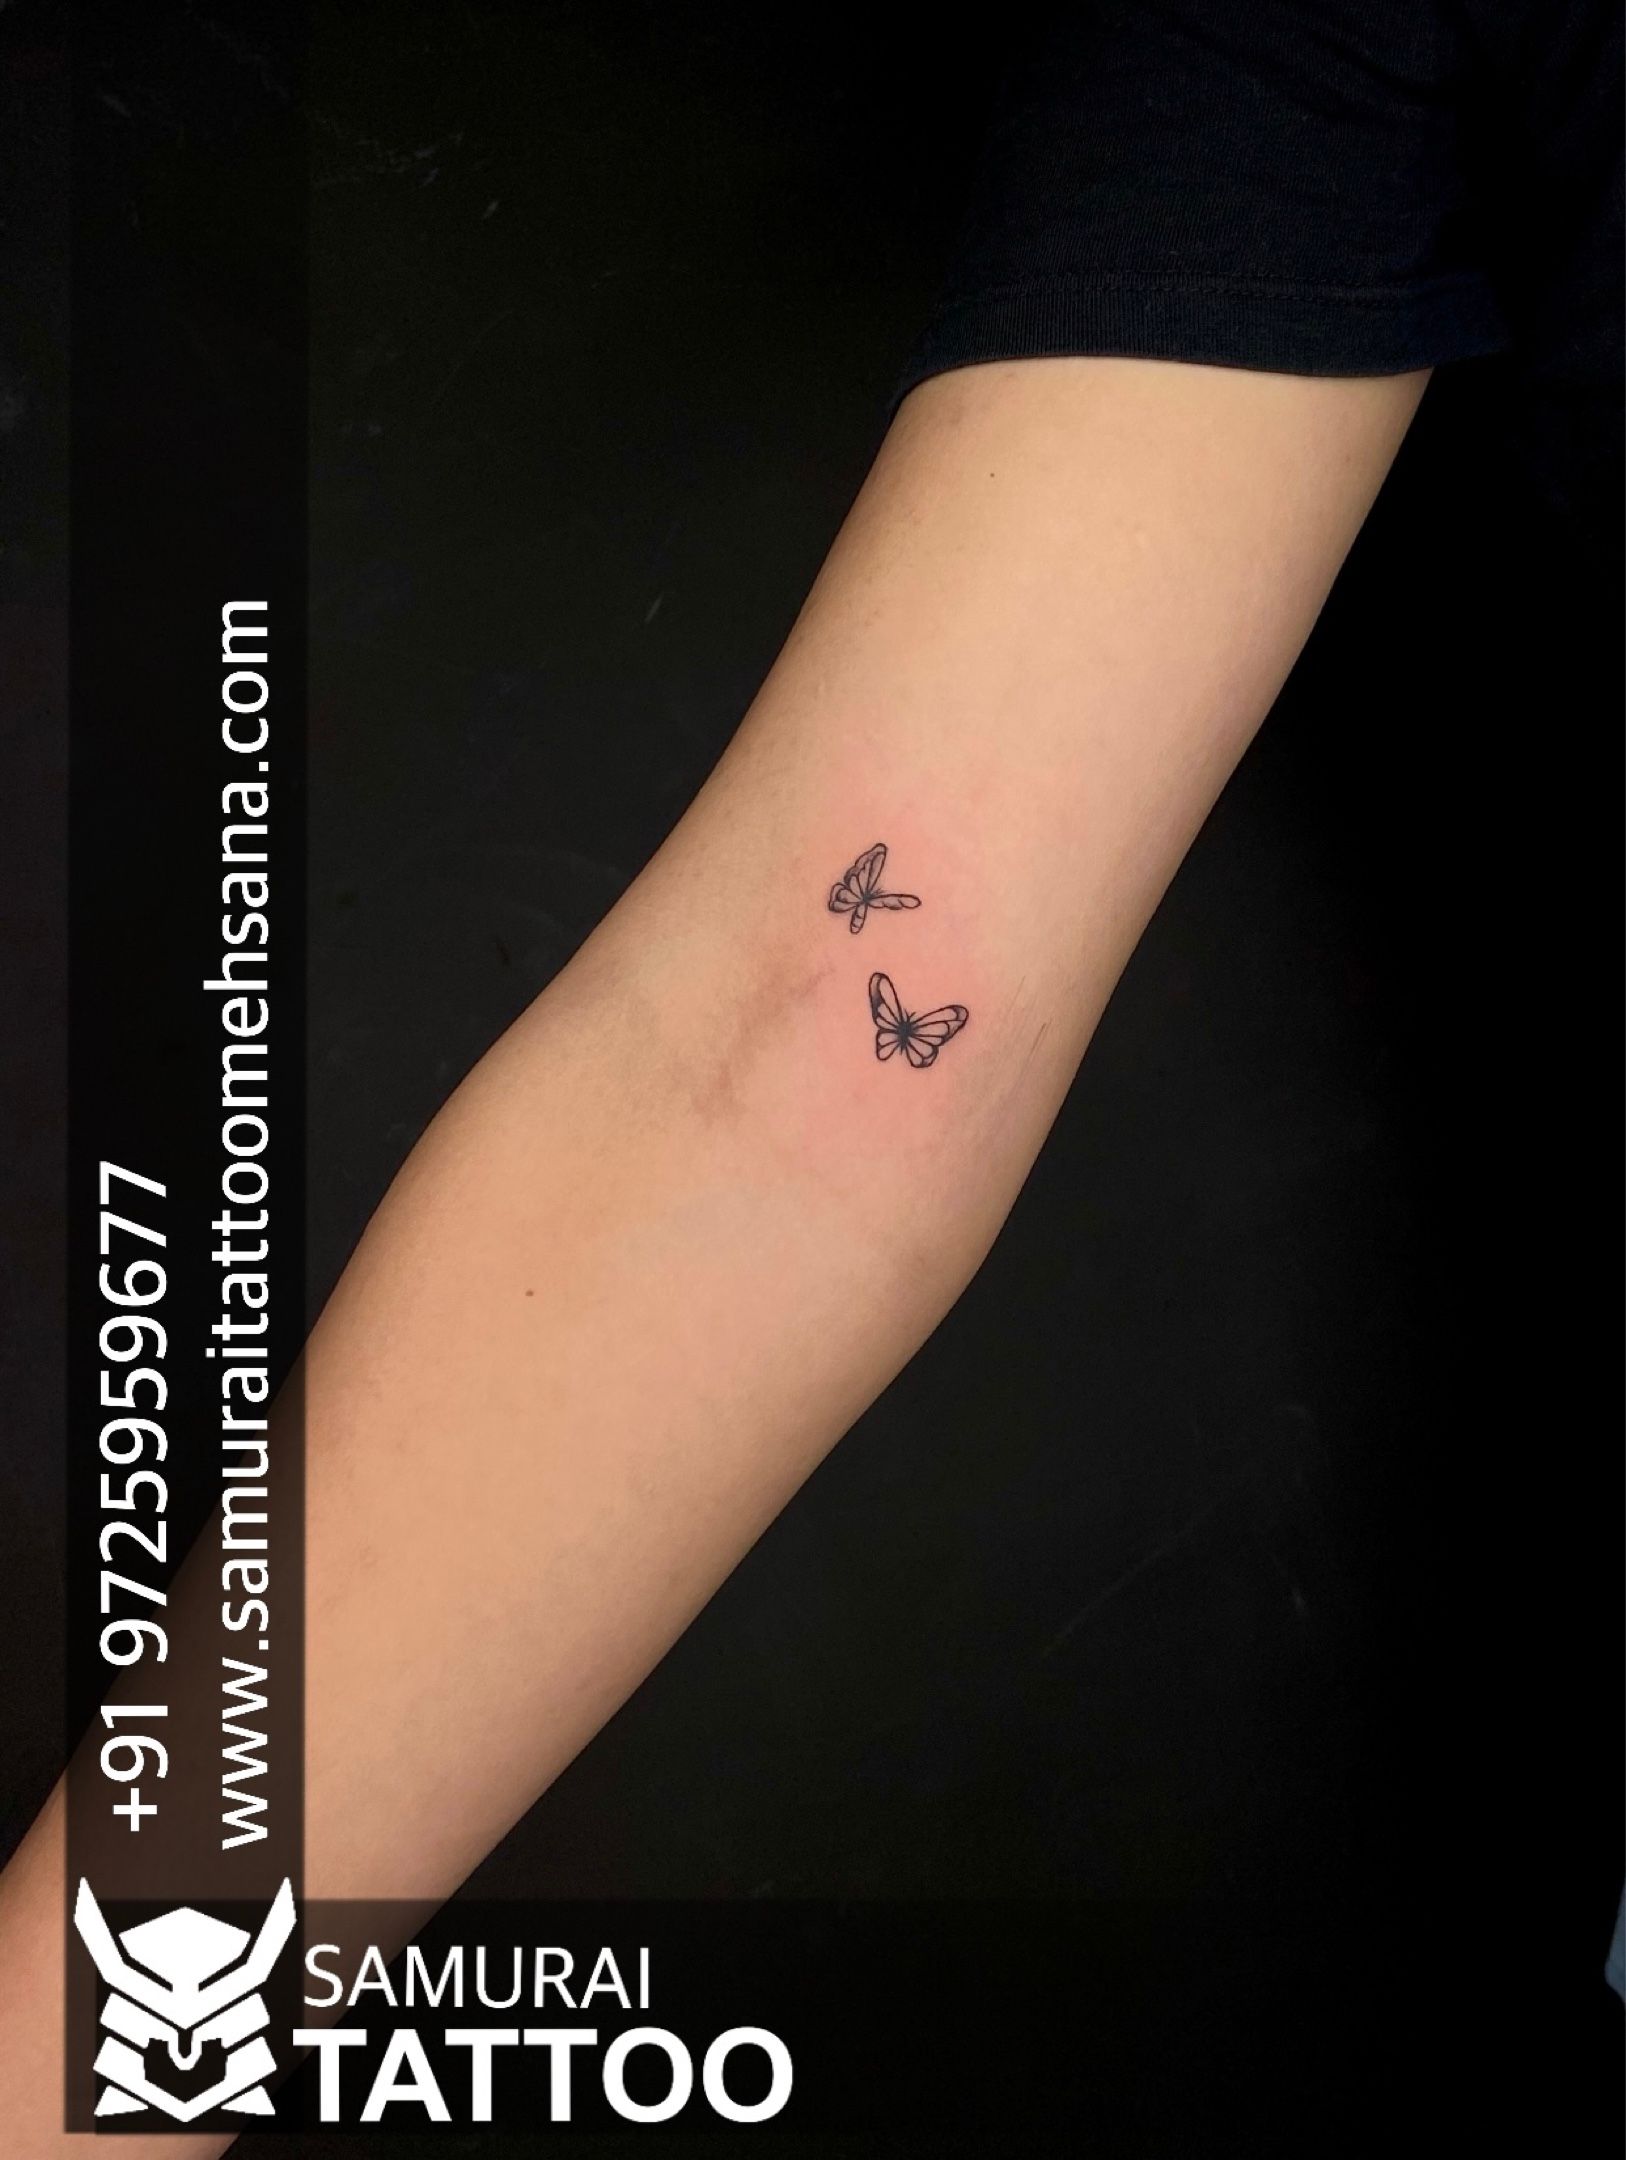 Small Tattoo Ideas✨ | Gallery posted by Felicity Rose | Lemon8